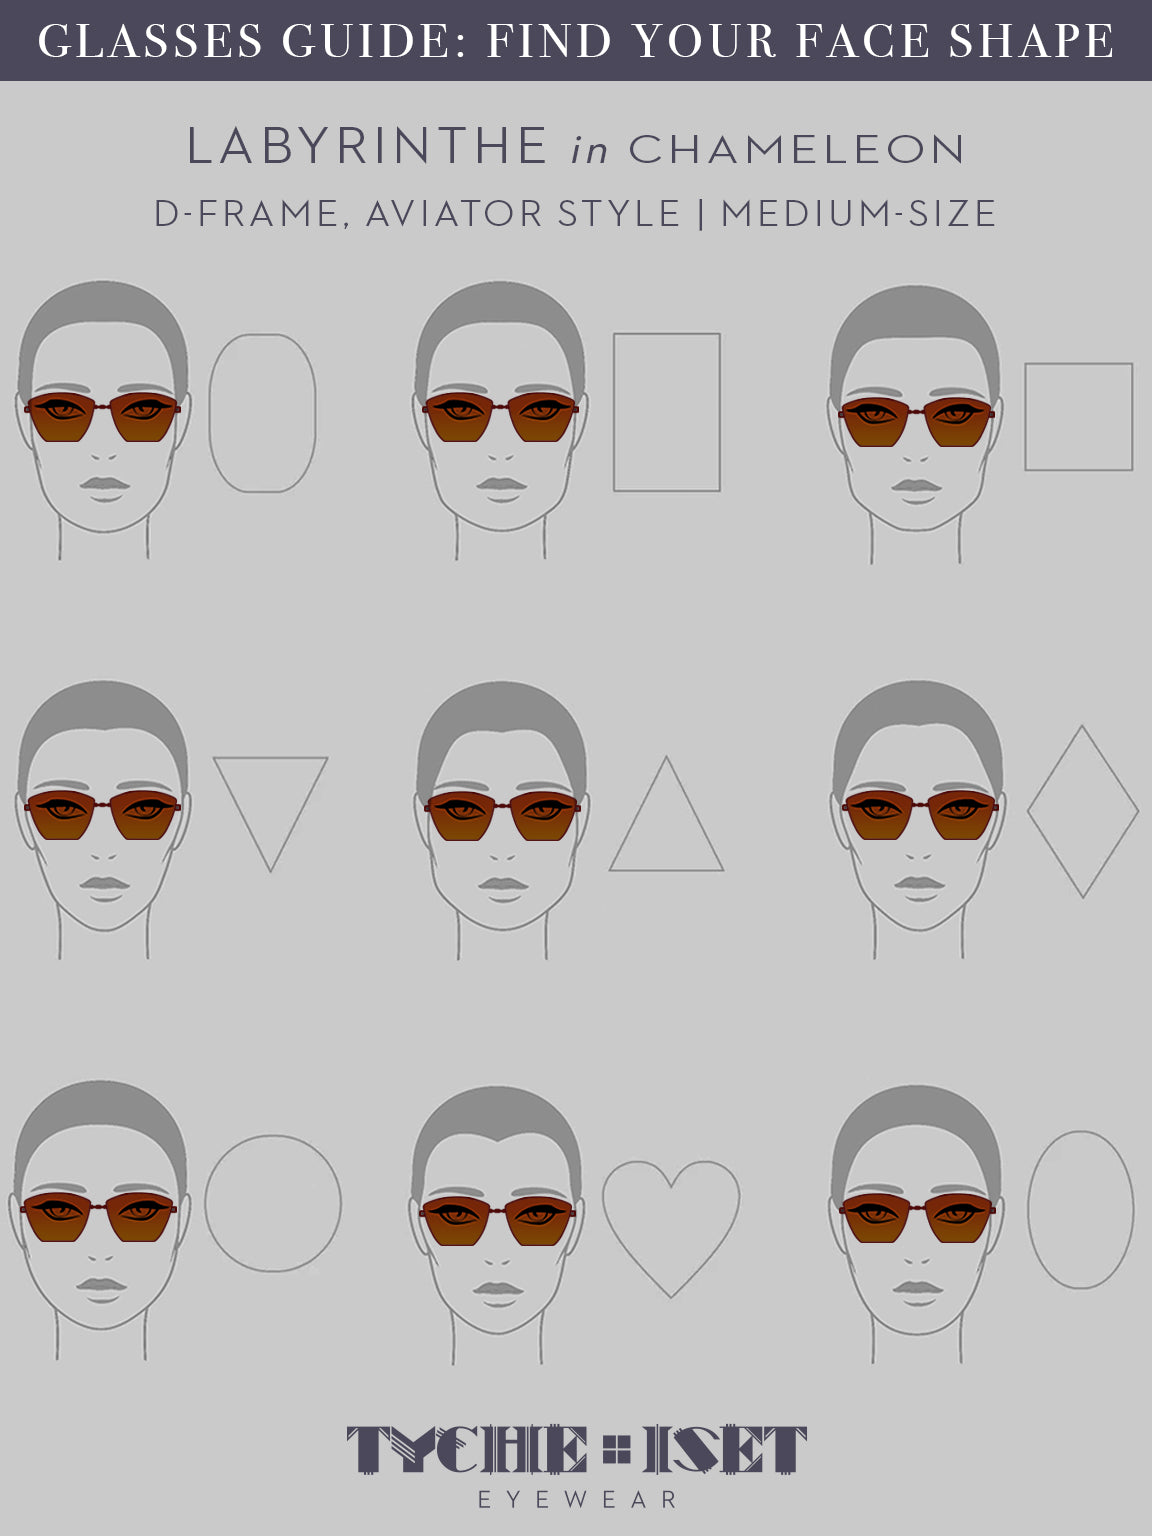 FACE SHAPE SUNGLASSES GUIDE, EYEWEAR FACE SHAPE GUIDE, Lightweight titanium glasses, strong titanium sunglasses, sunglasses & optical, luxury eyewear, mazzucchelli italian acetate, made in japan, mythology, eyewear designer, woman owned small business, summer accessories, chic style, celebrity style, aviator glasses, d-frame eyewear, cat eye sunglasses, art deco, geometric art, MAROON glasses, RED SUNGLASSES